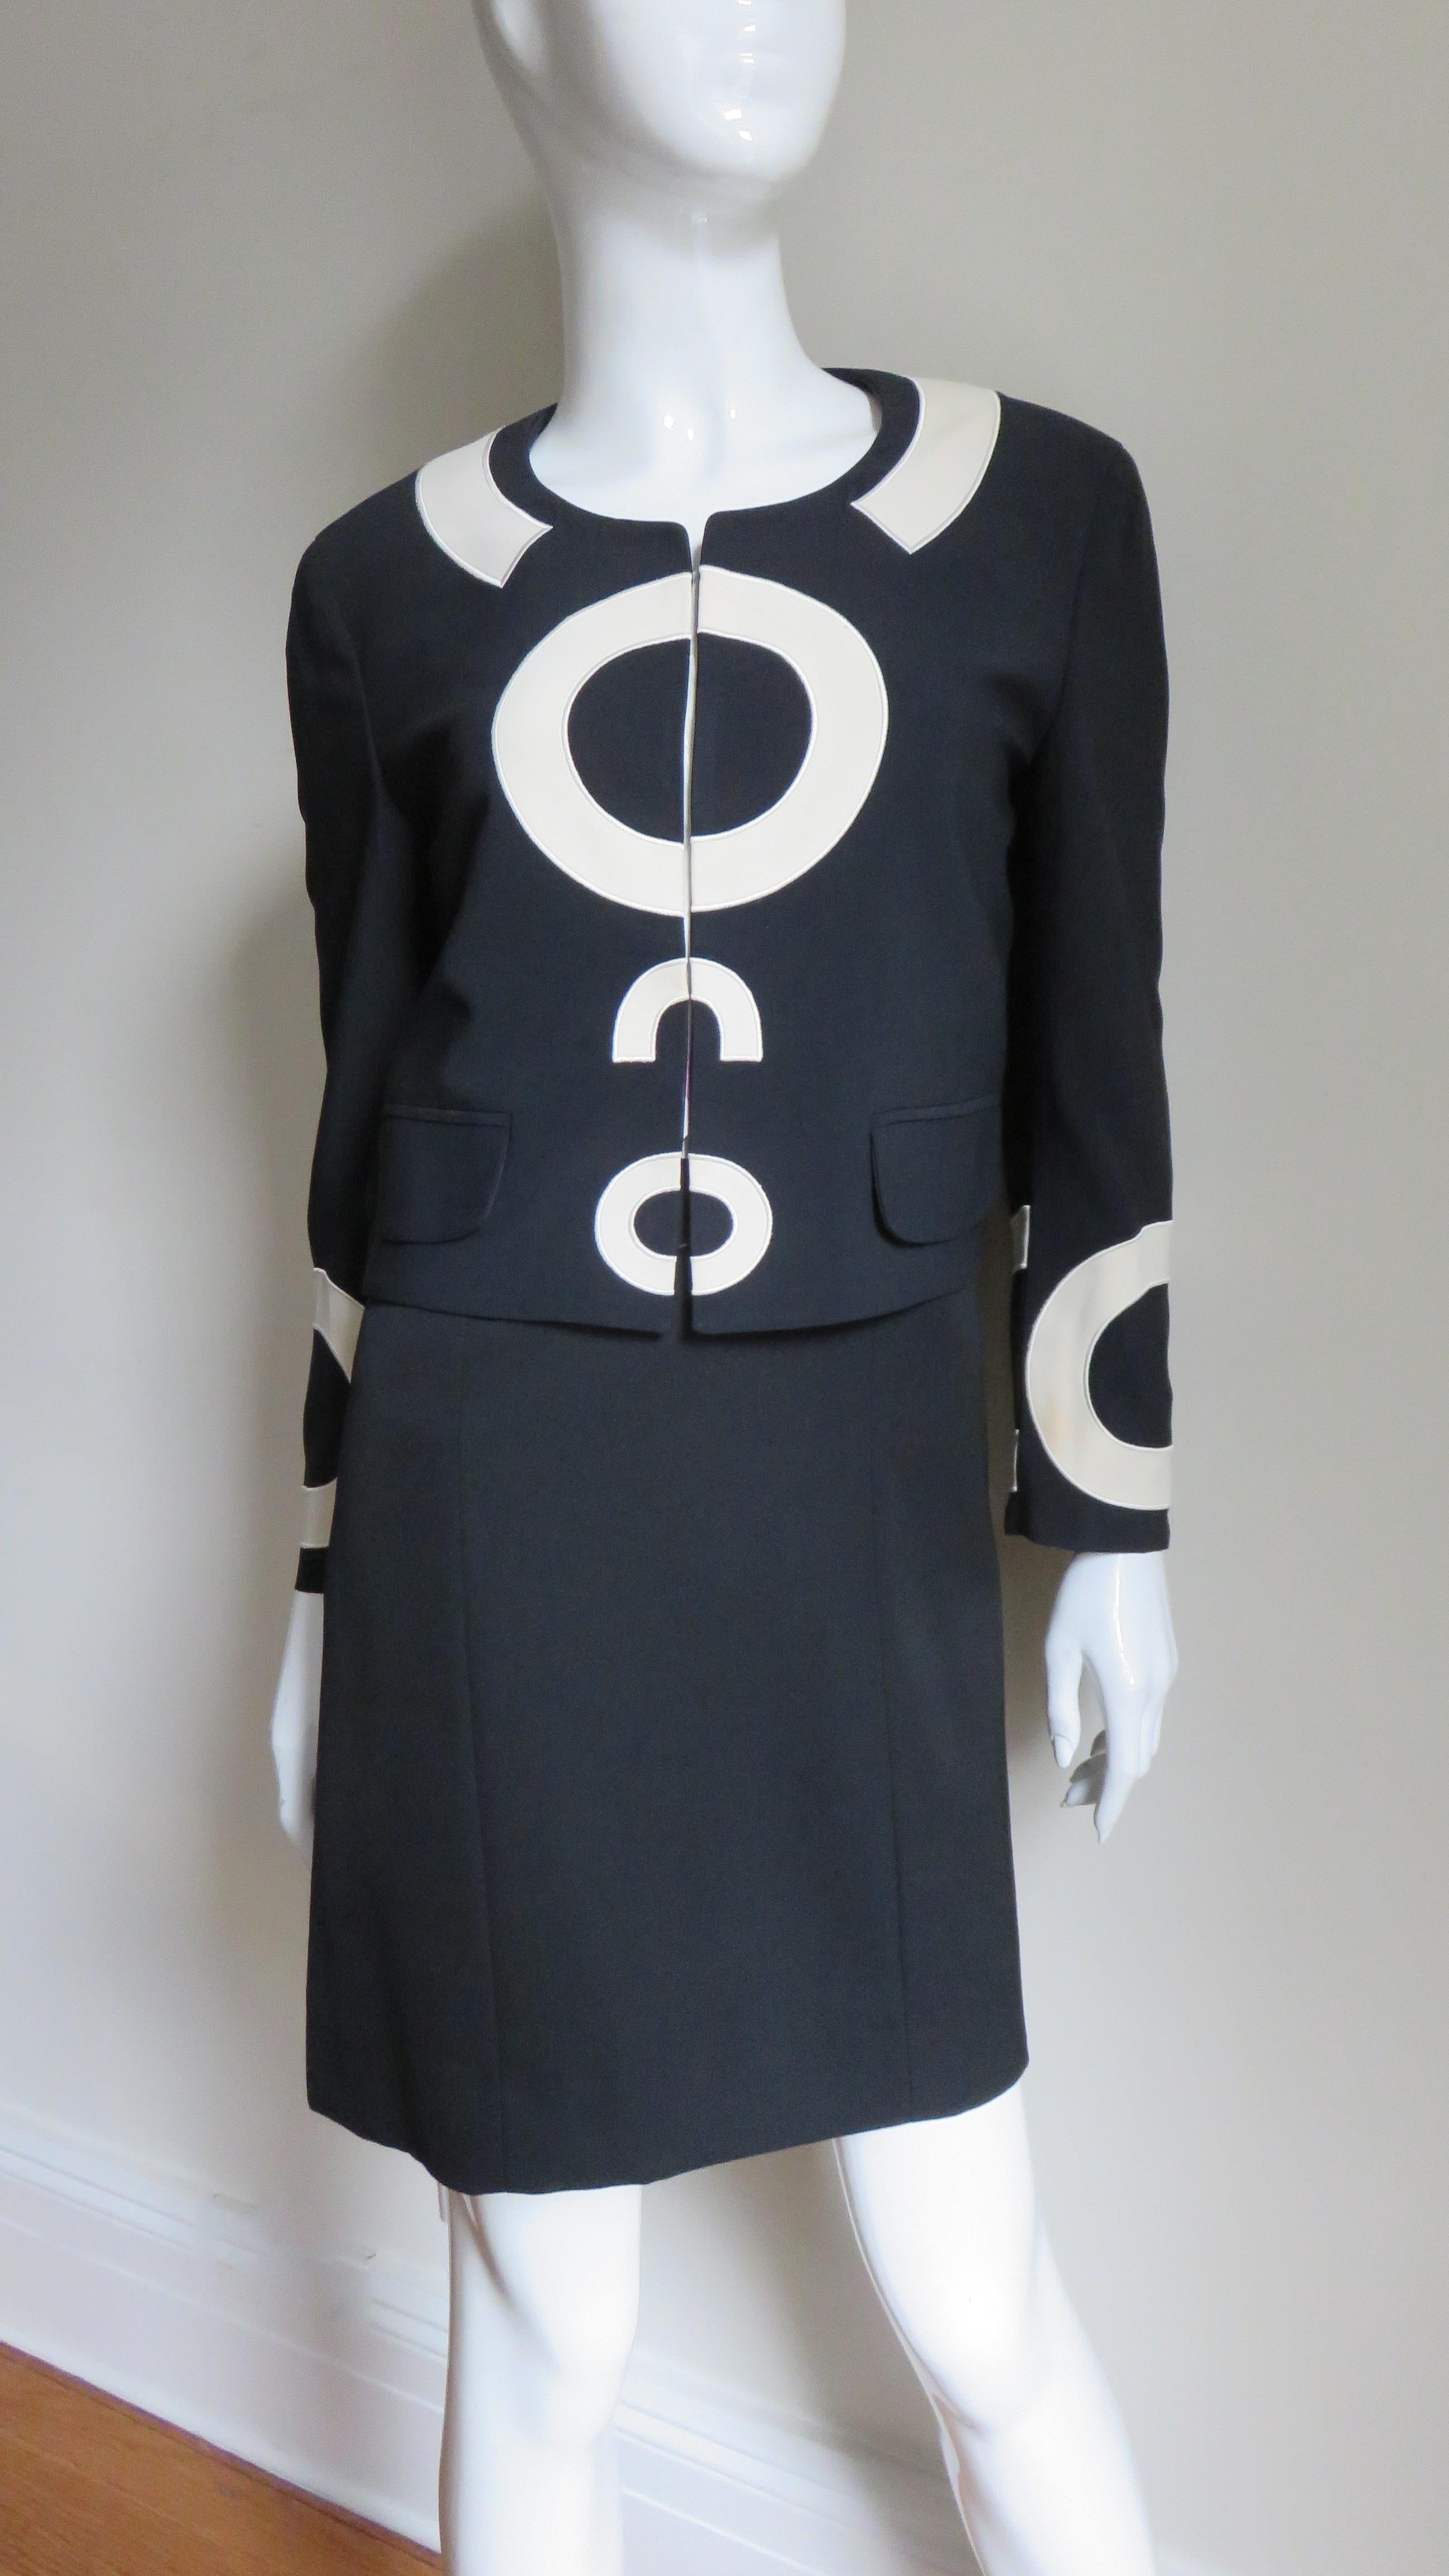 A fabulous dress and jacket set from Moschino Couture in black highlighted with off white silk appliqued lettering and graphics. The dress is a simple sleeveless shift with a crew neck and the words 'BE SIMPLE' appliqued on the front in large off